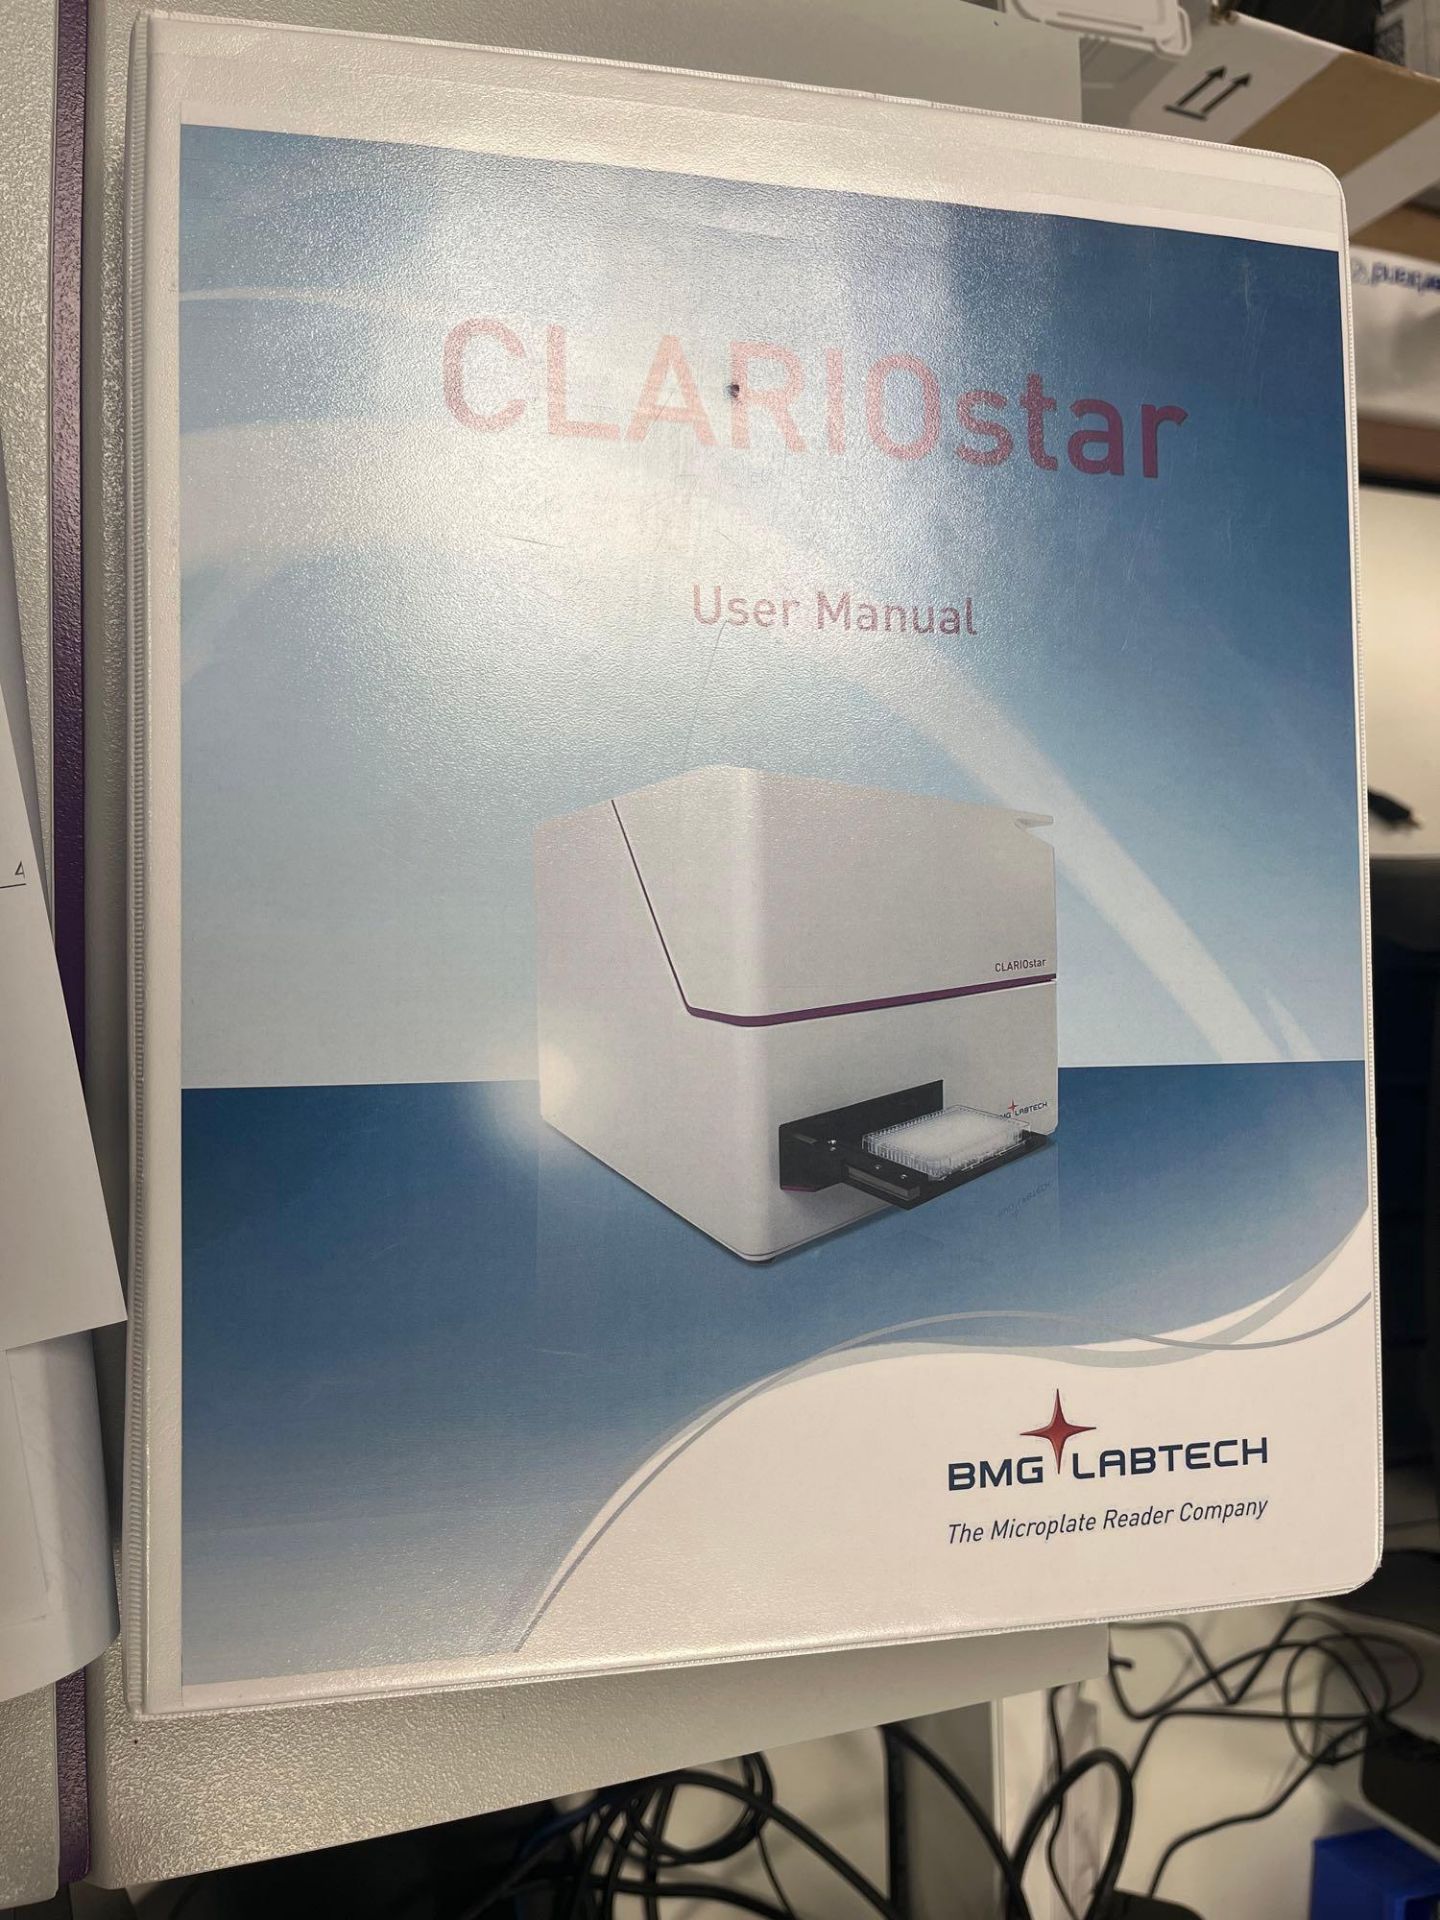 ClarioStar BMG Labtech microplate reader - Image 4 of 5